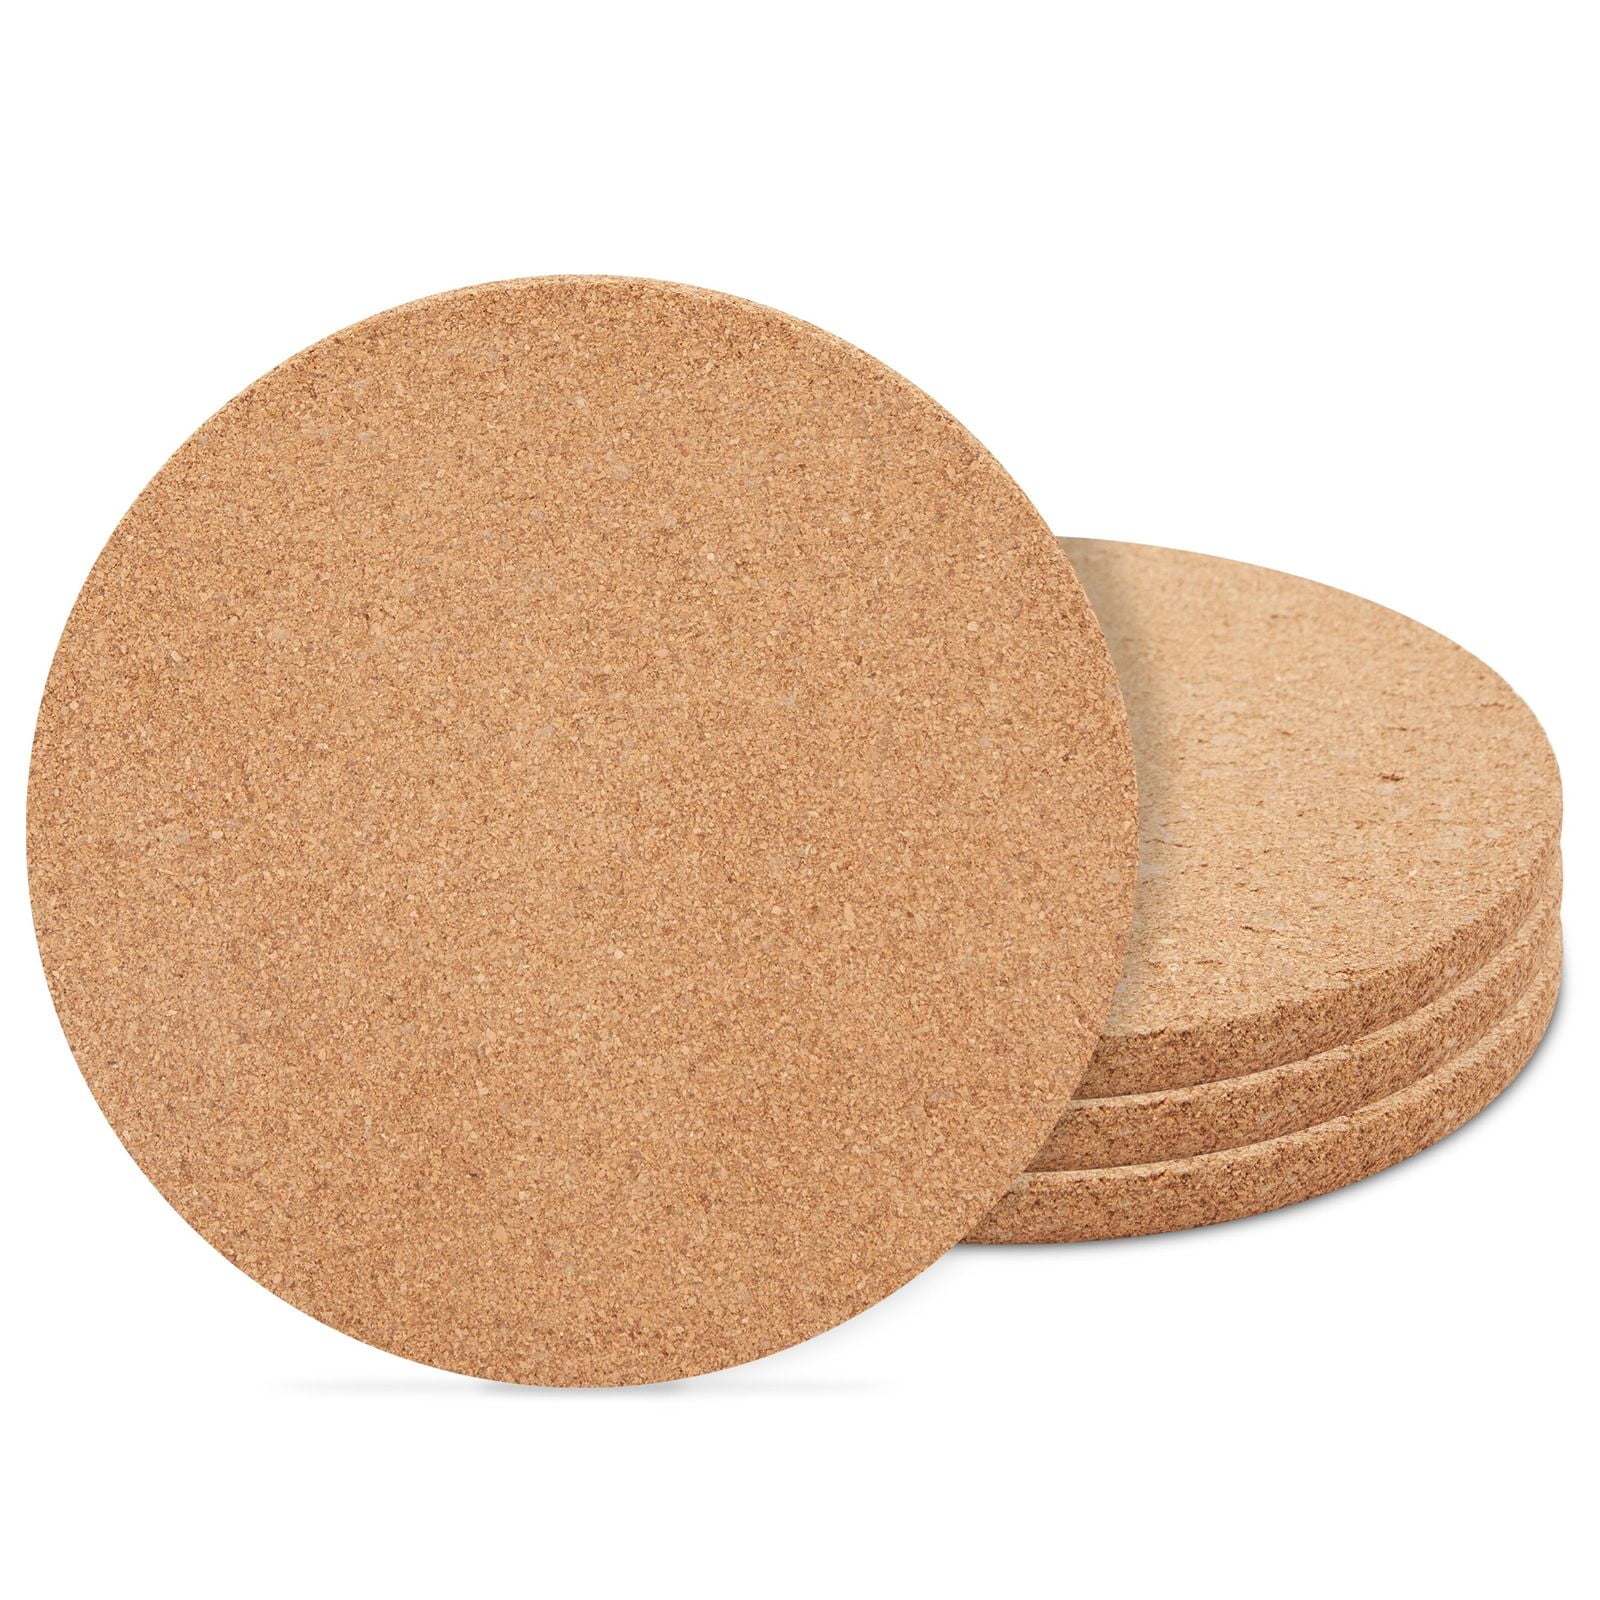 Protect Countertops From Hot Cookware NEW 3pcs Natural Cork Trivets 7" 19 cm 